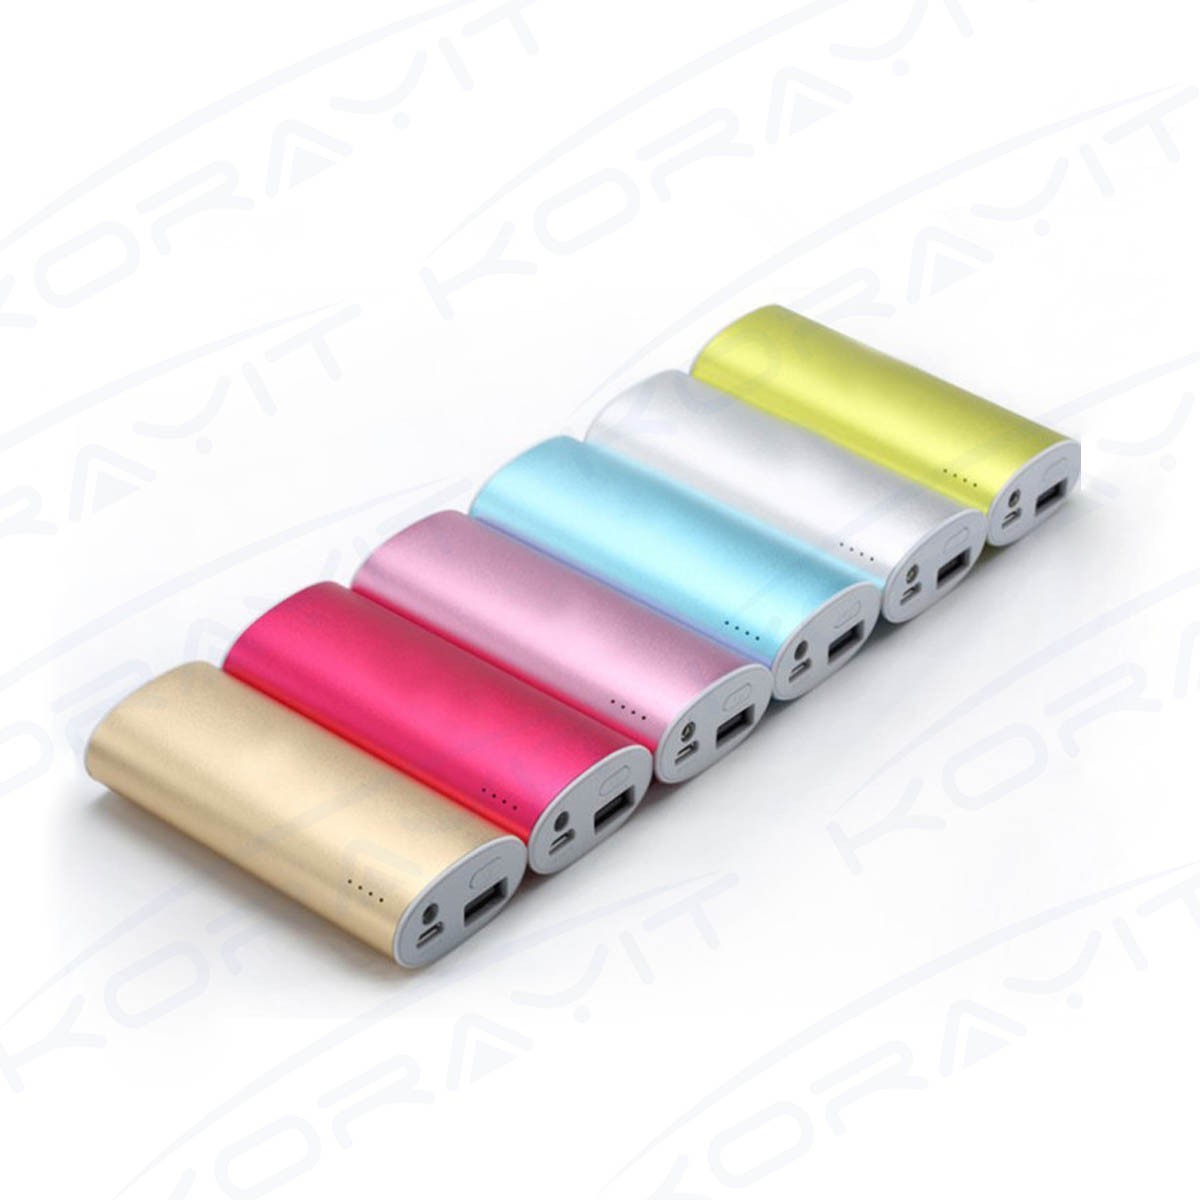 China China Manufacturer Oval 5200mah Portable Mobile Power Bank with LED Flashlight Gifts wholesale